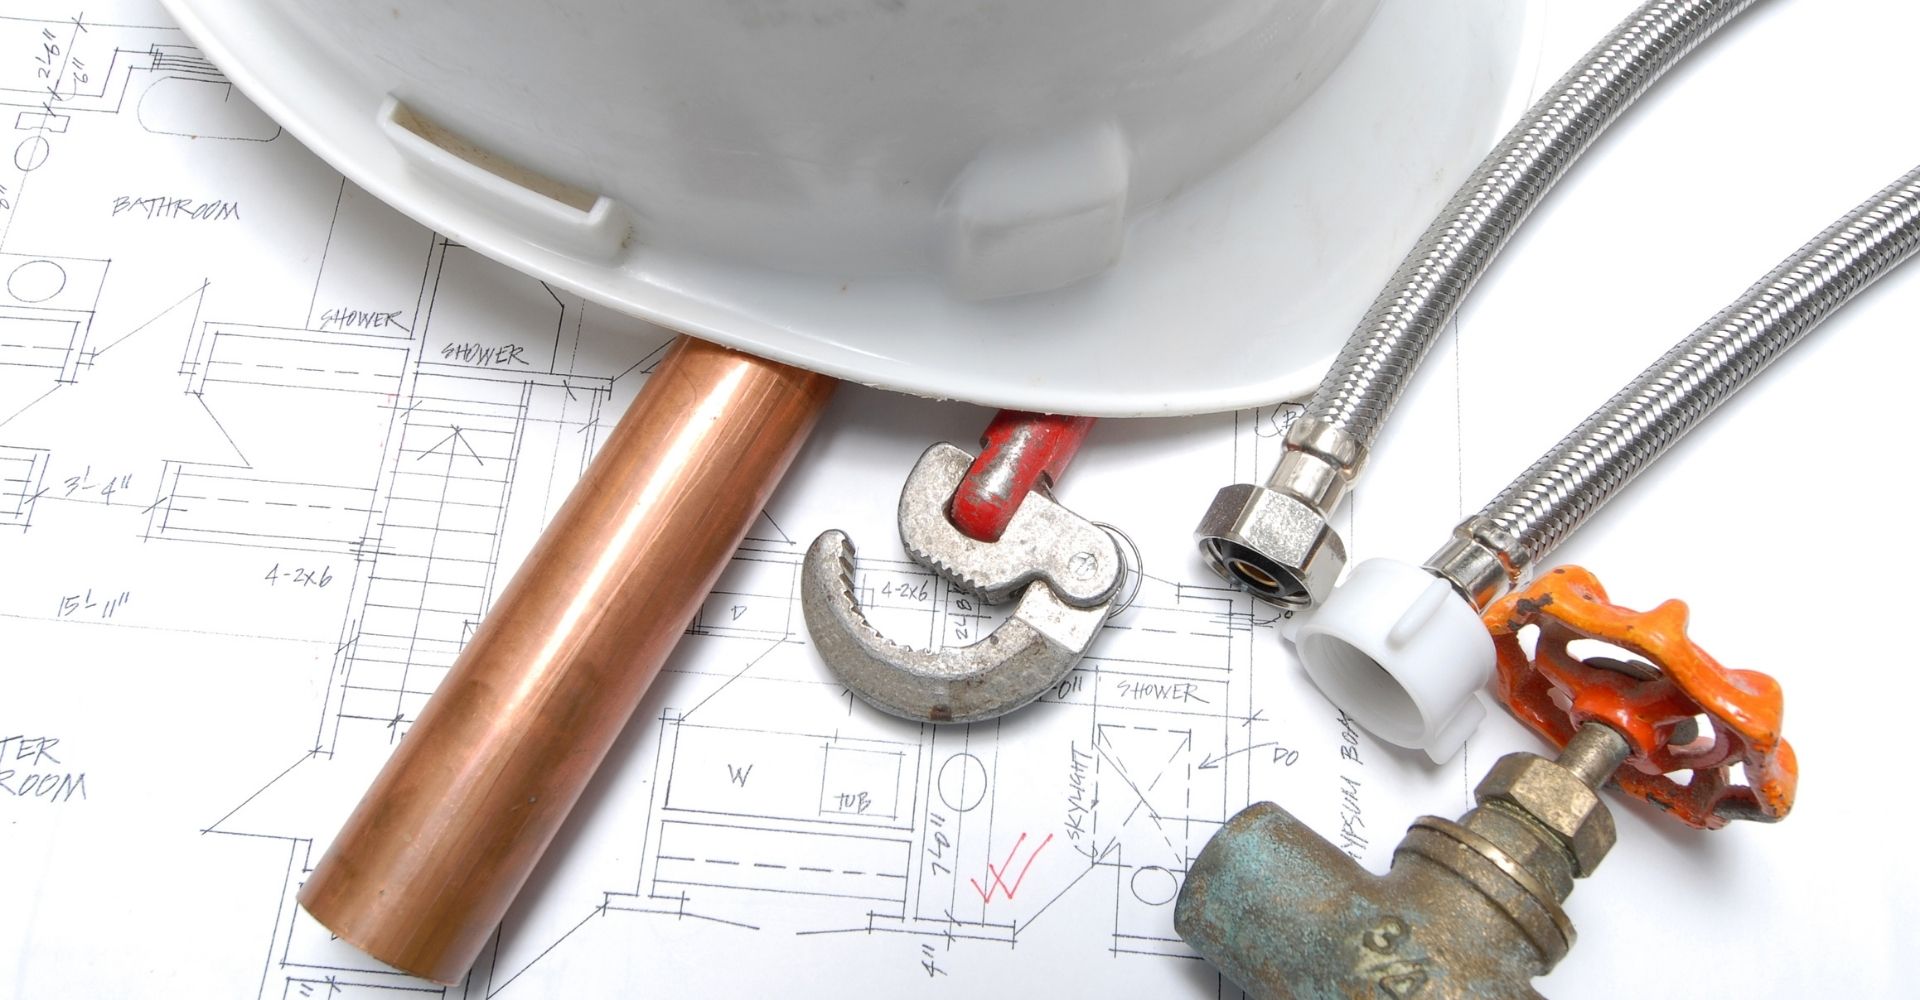 Hire Plumber For Clogged Drains